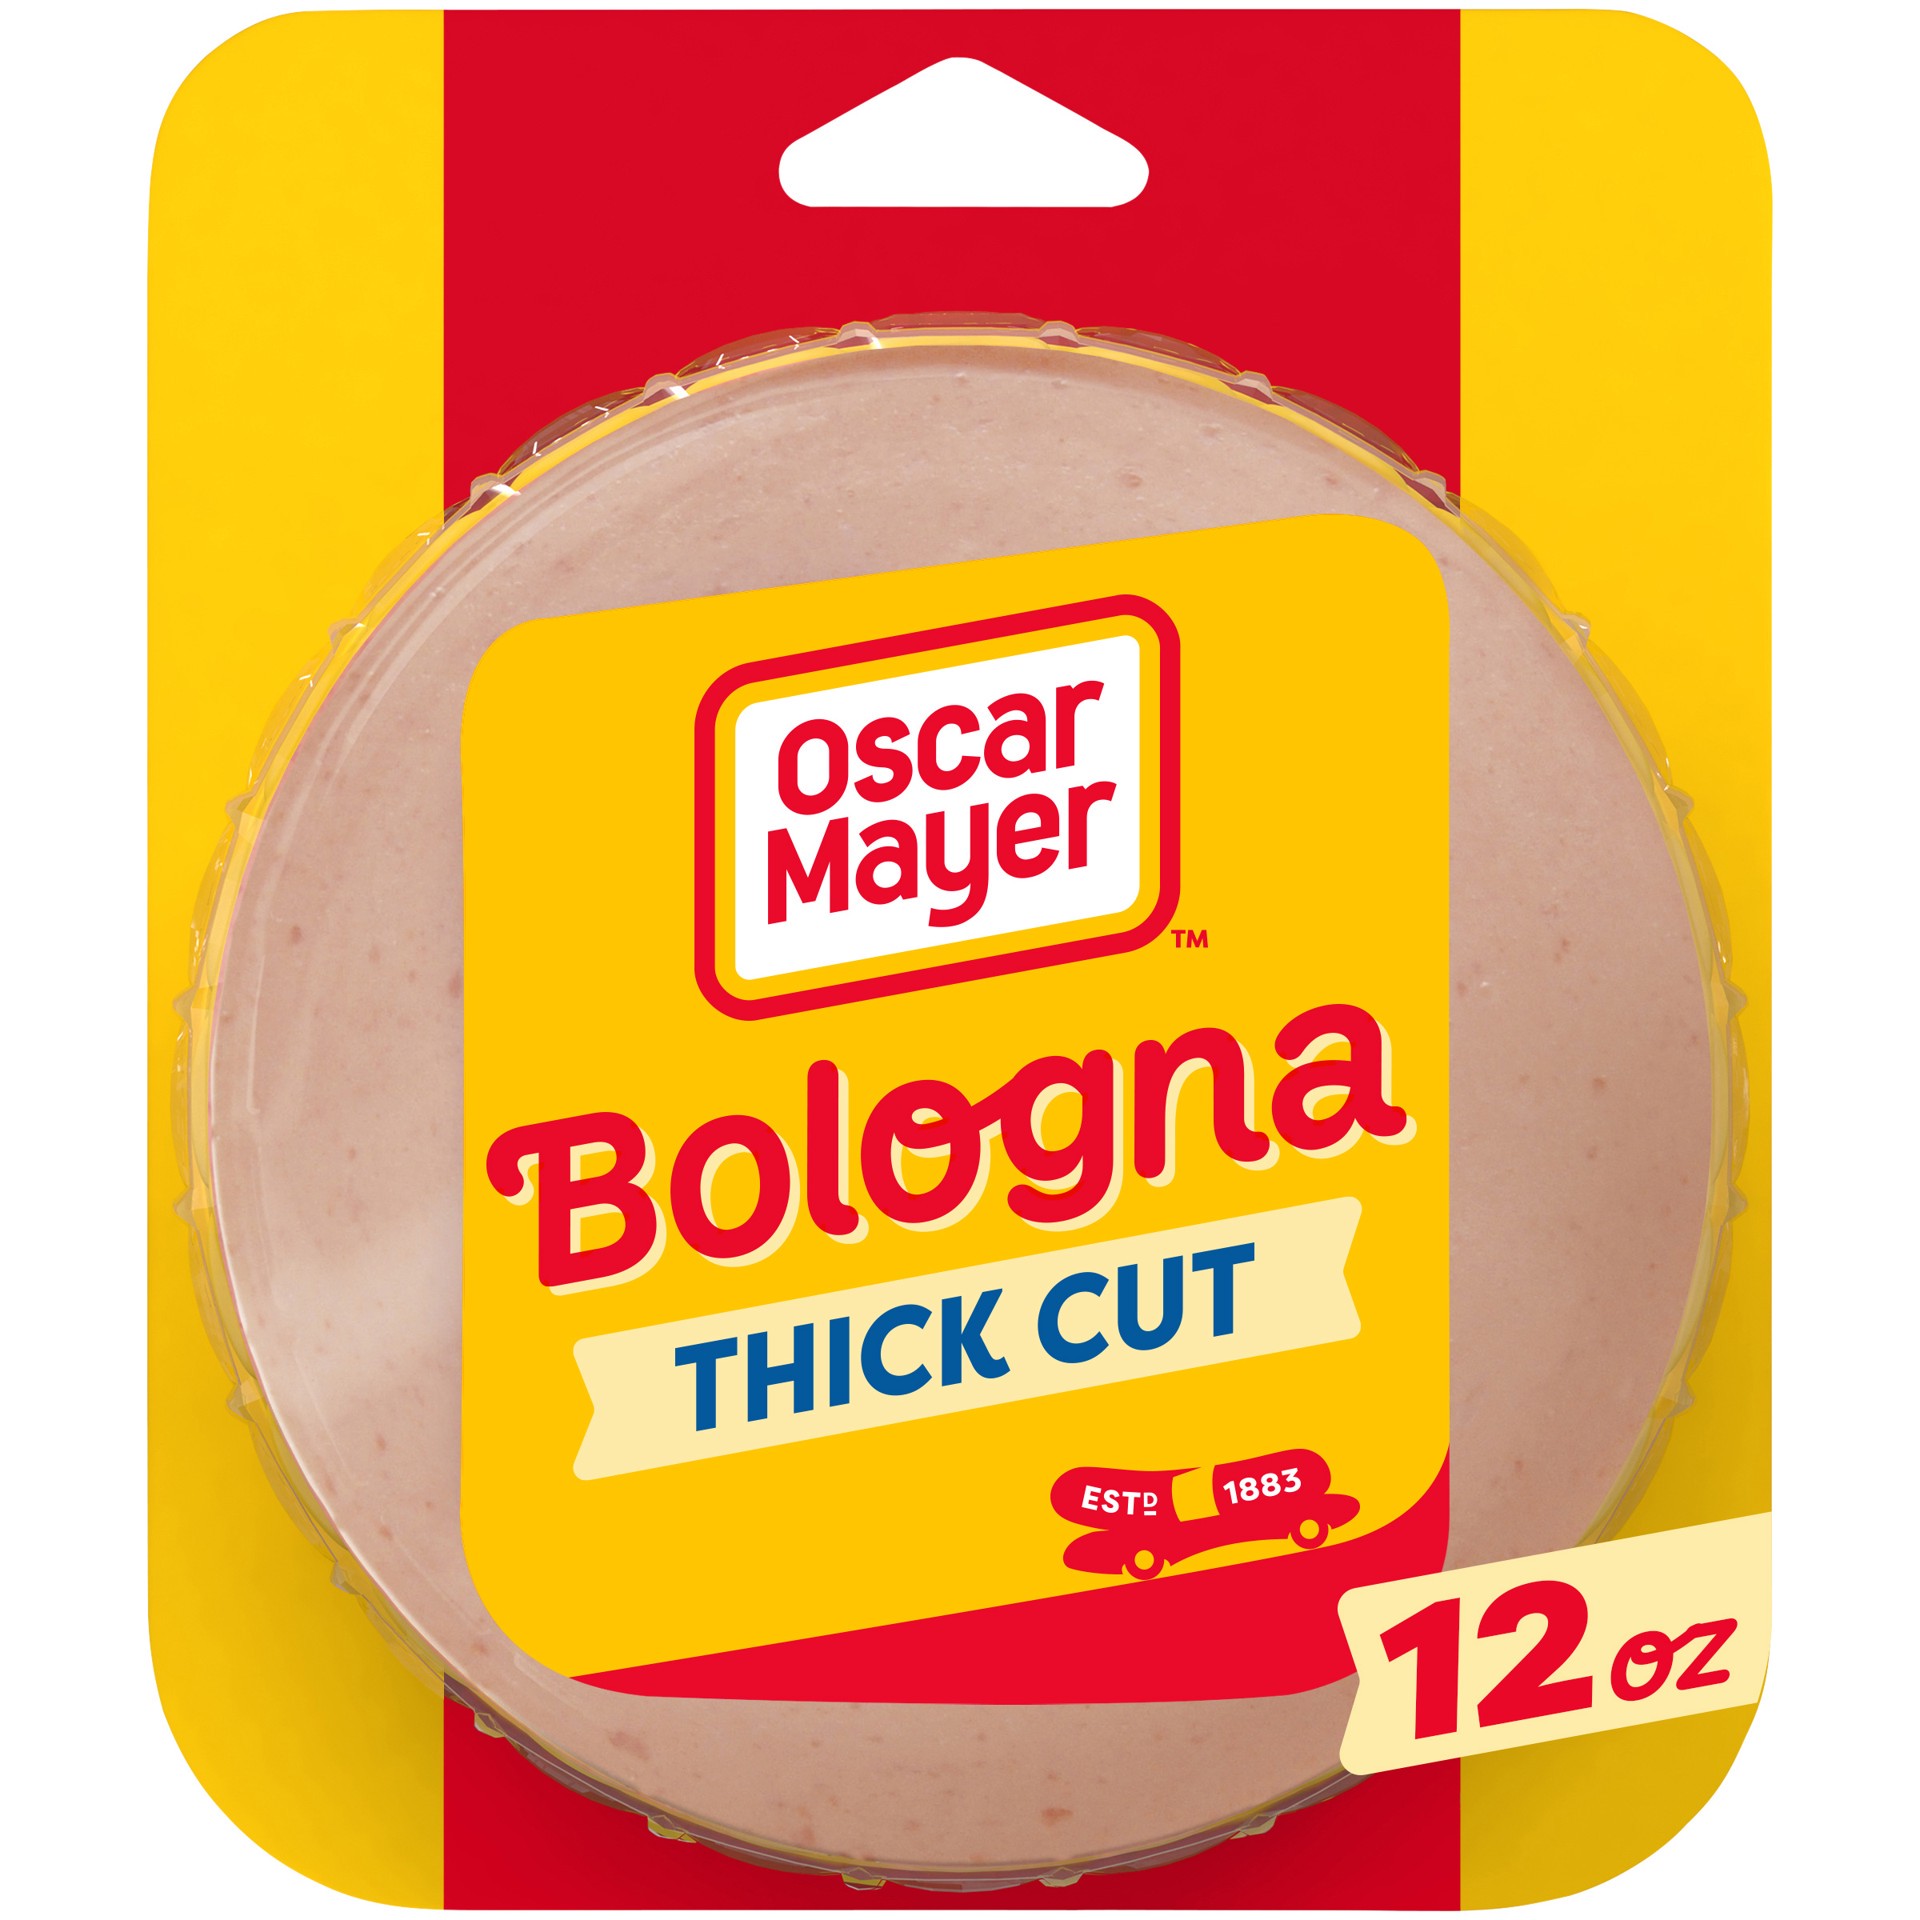 slide 1 of 2, Oscar Mayer Thick Cut Bologna made with chicken & pork, beef added Sliced Lunch Meat, 12 oz. Pack, 12 oz